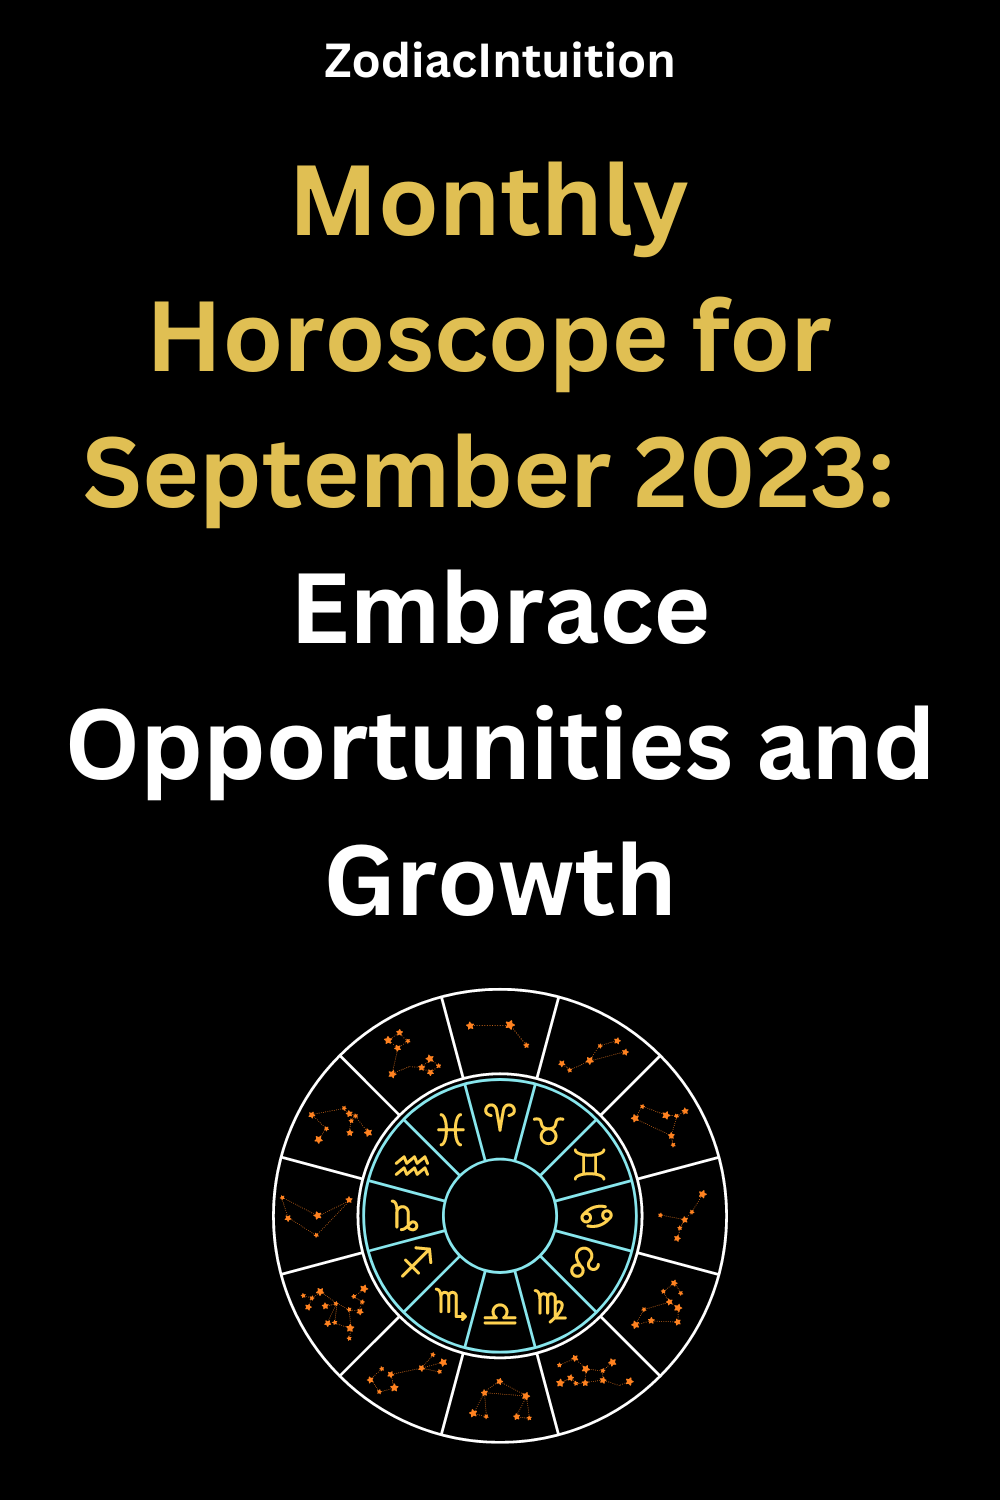 Monthly Horoscope for September 2023: Embrace Opportunities and Growth